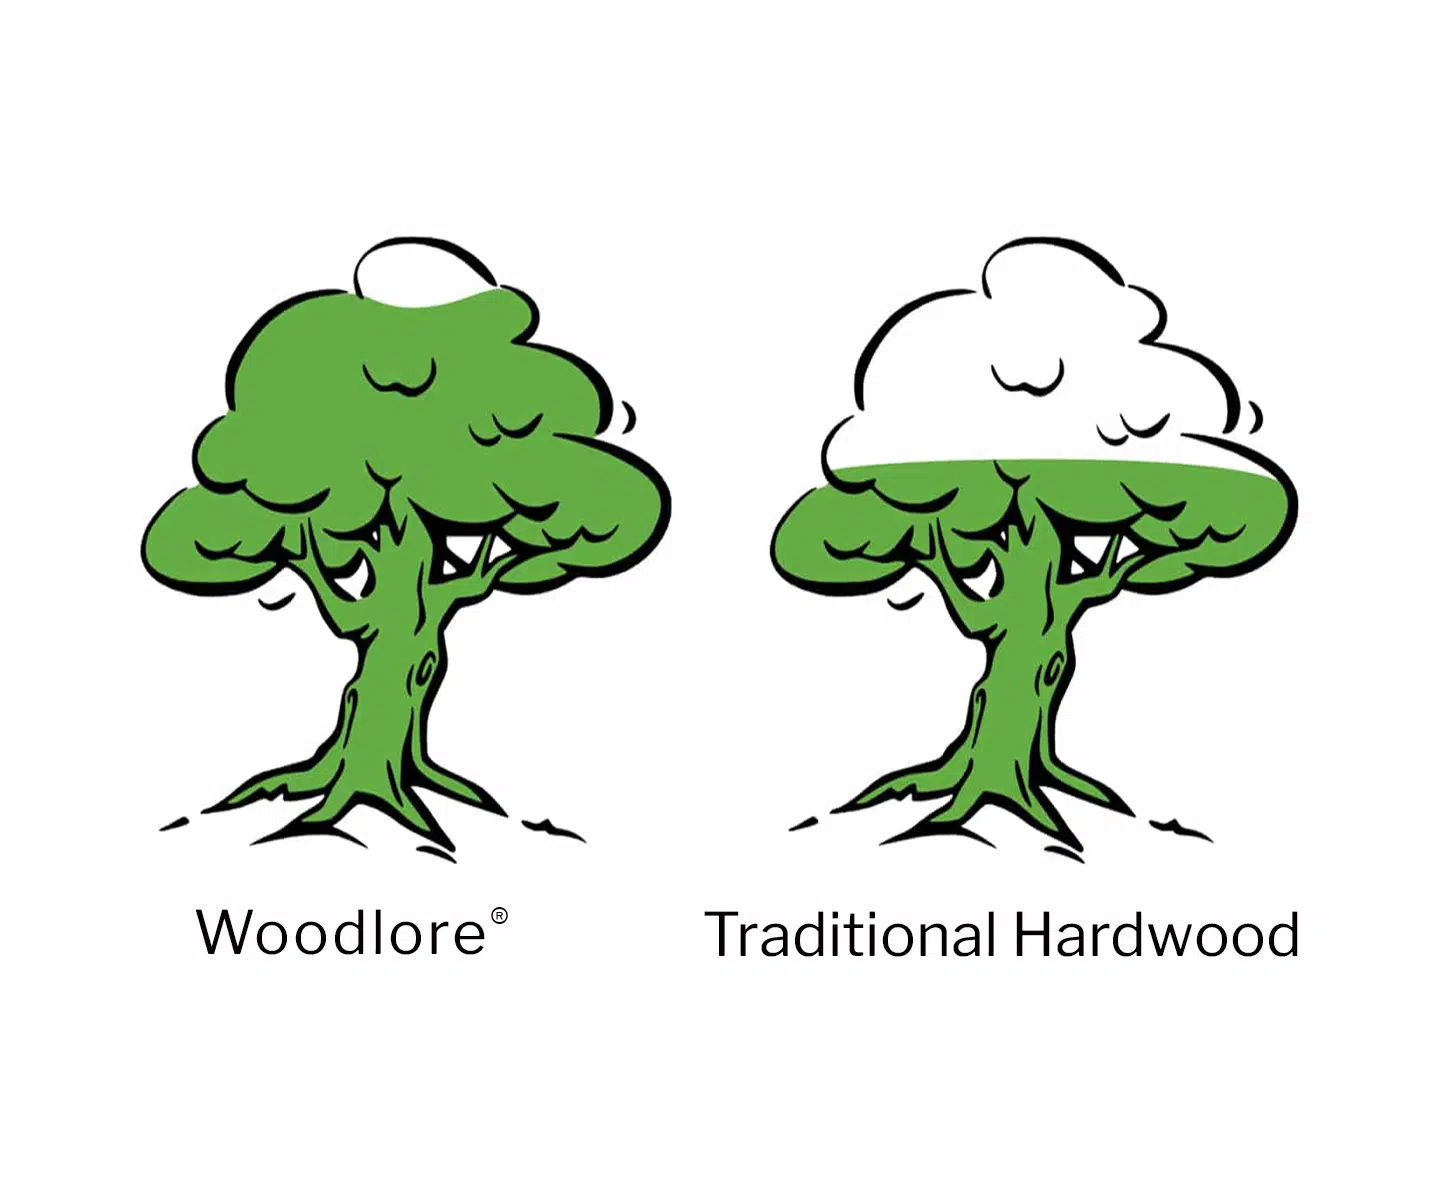 Illustration of two trees portraying the eco-friendliness of Woodlore Shutters